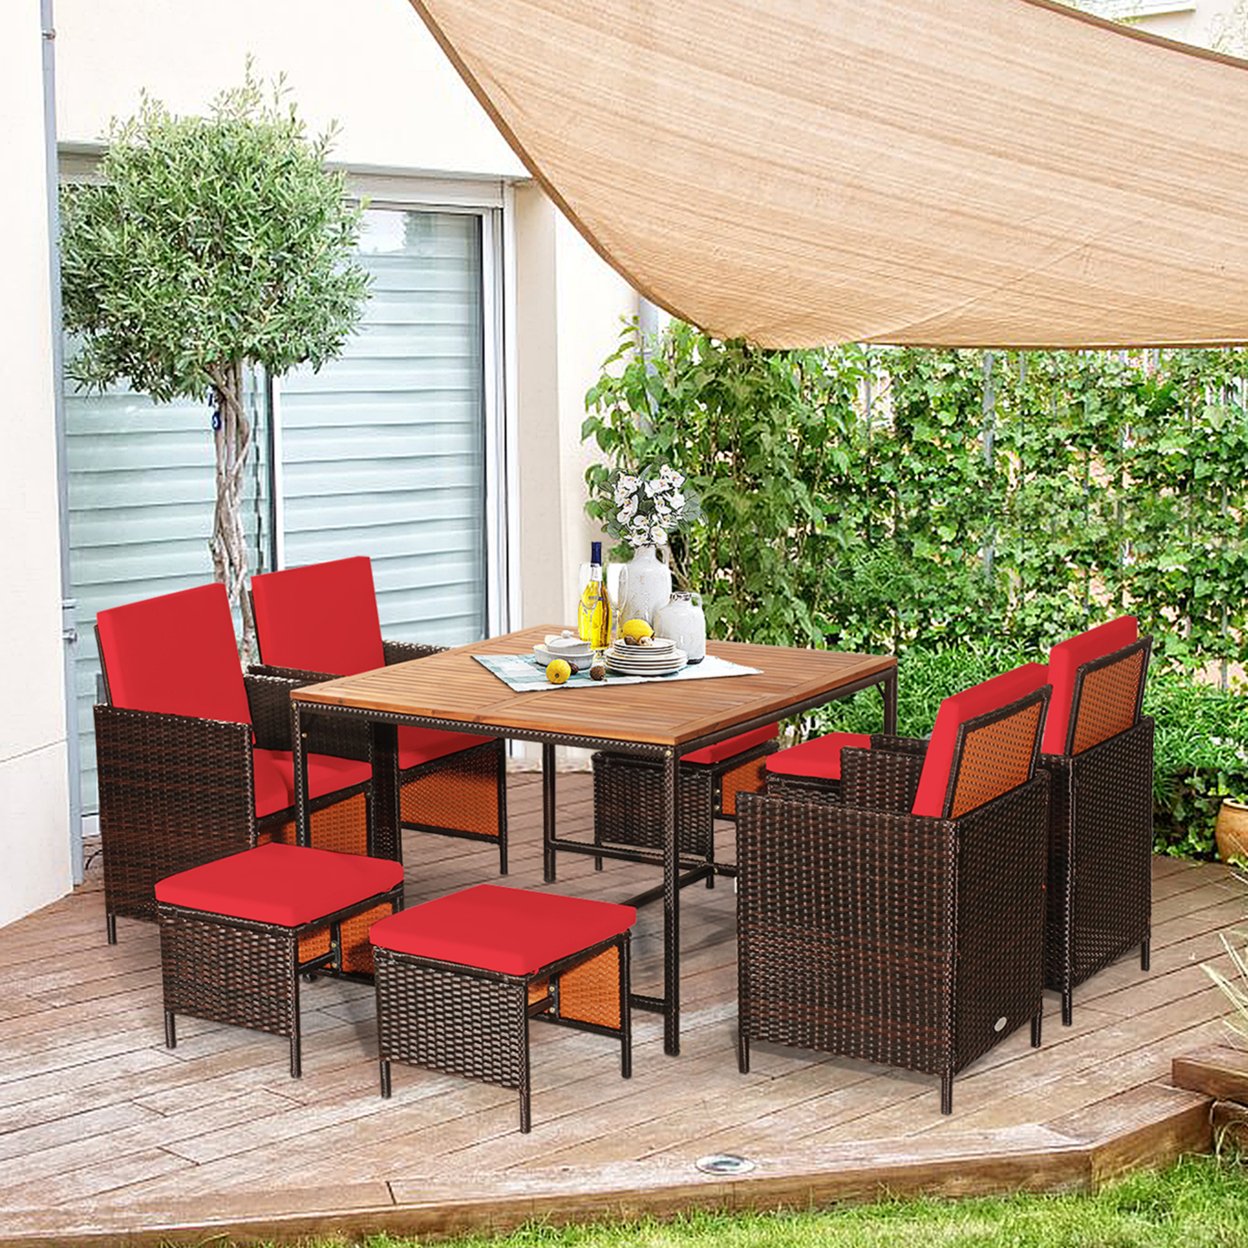 9PC Rattan Wicker Patio Dining Set Outdoor Furniture Set W/ Red Cushion